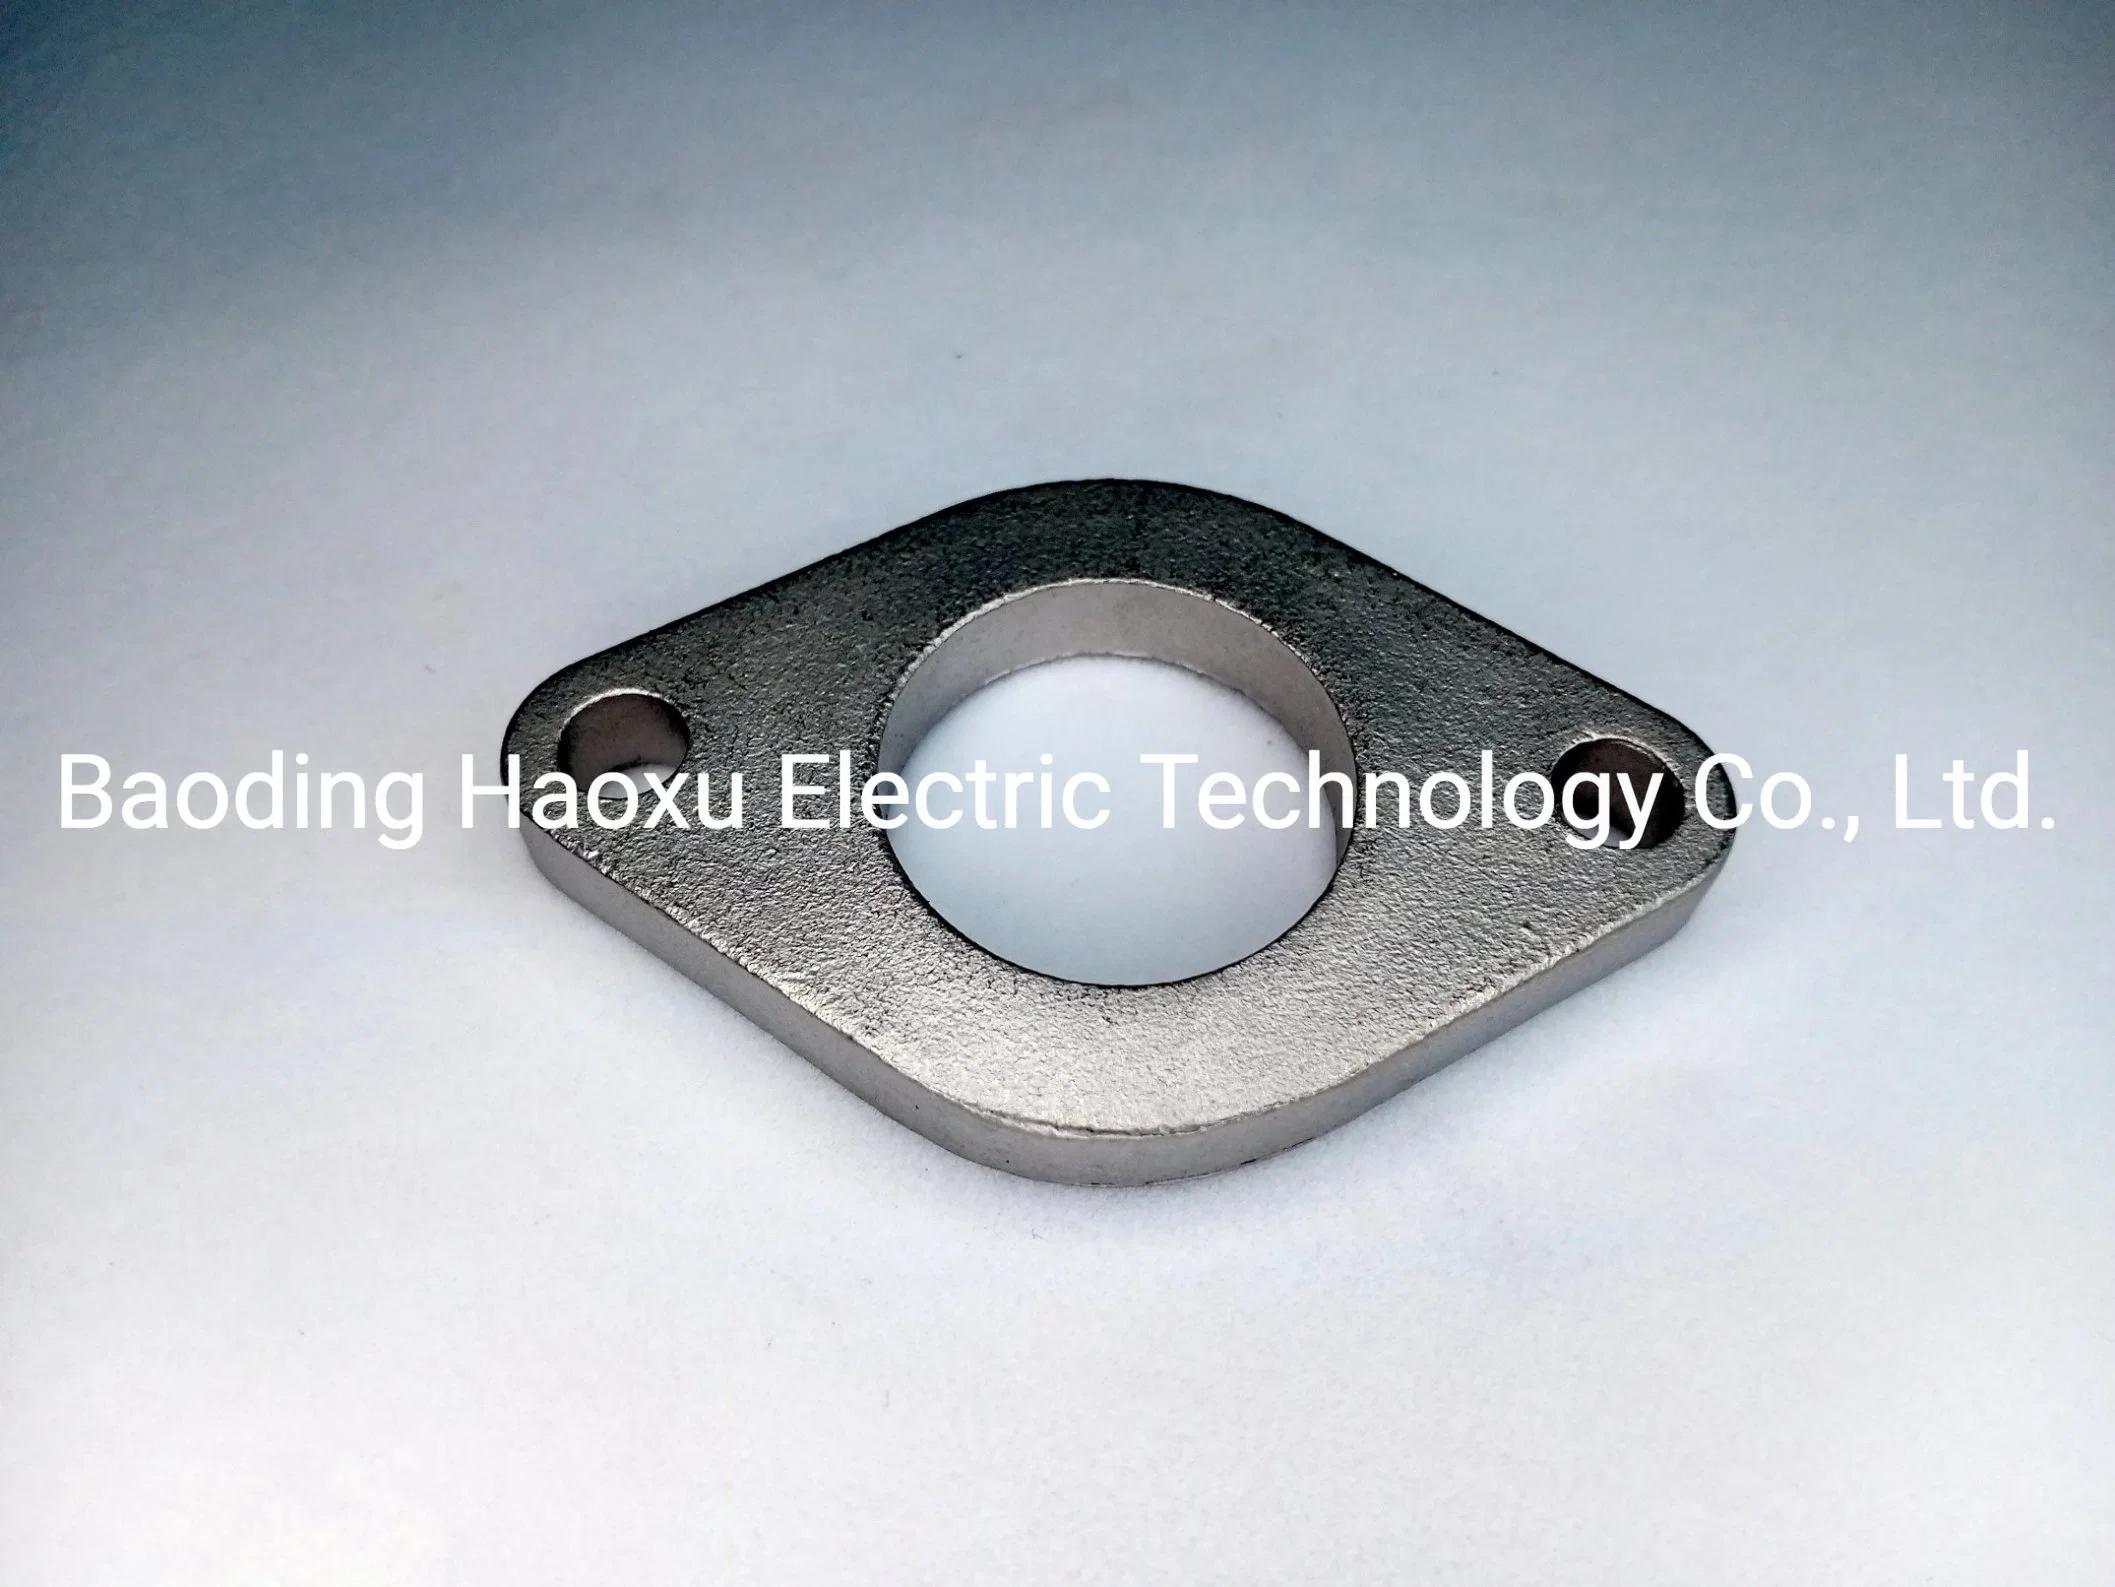 OEM Customized Metal Parts Used for Food and Beverage Machinery by Investment Casting